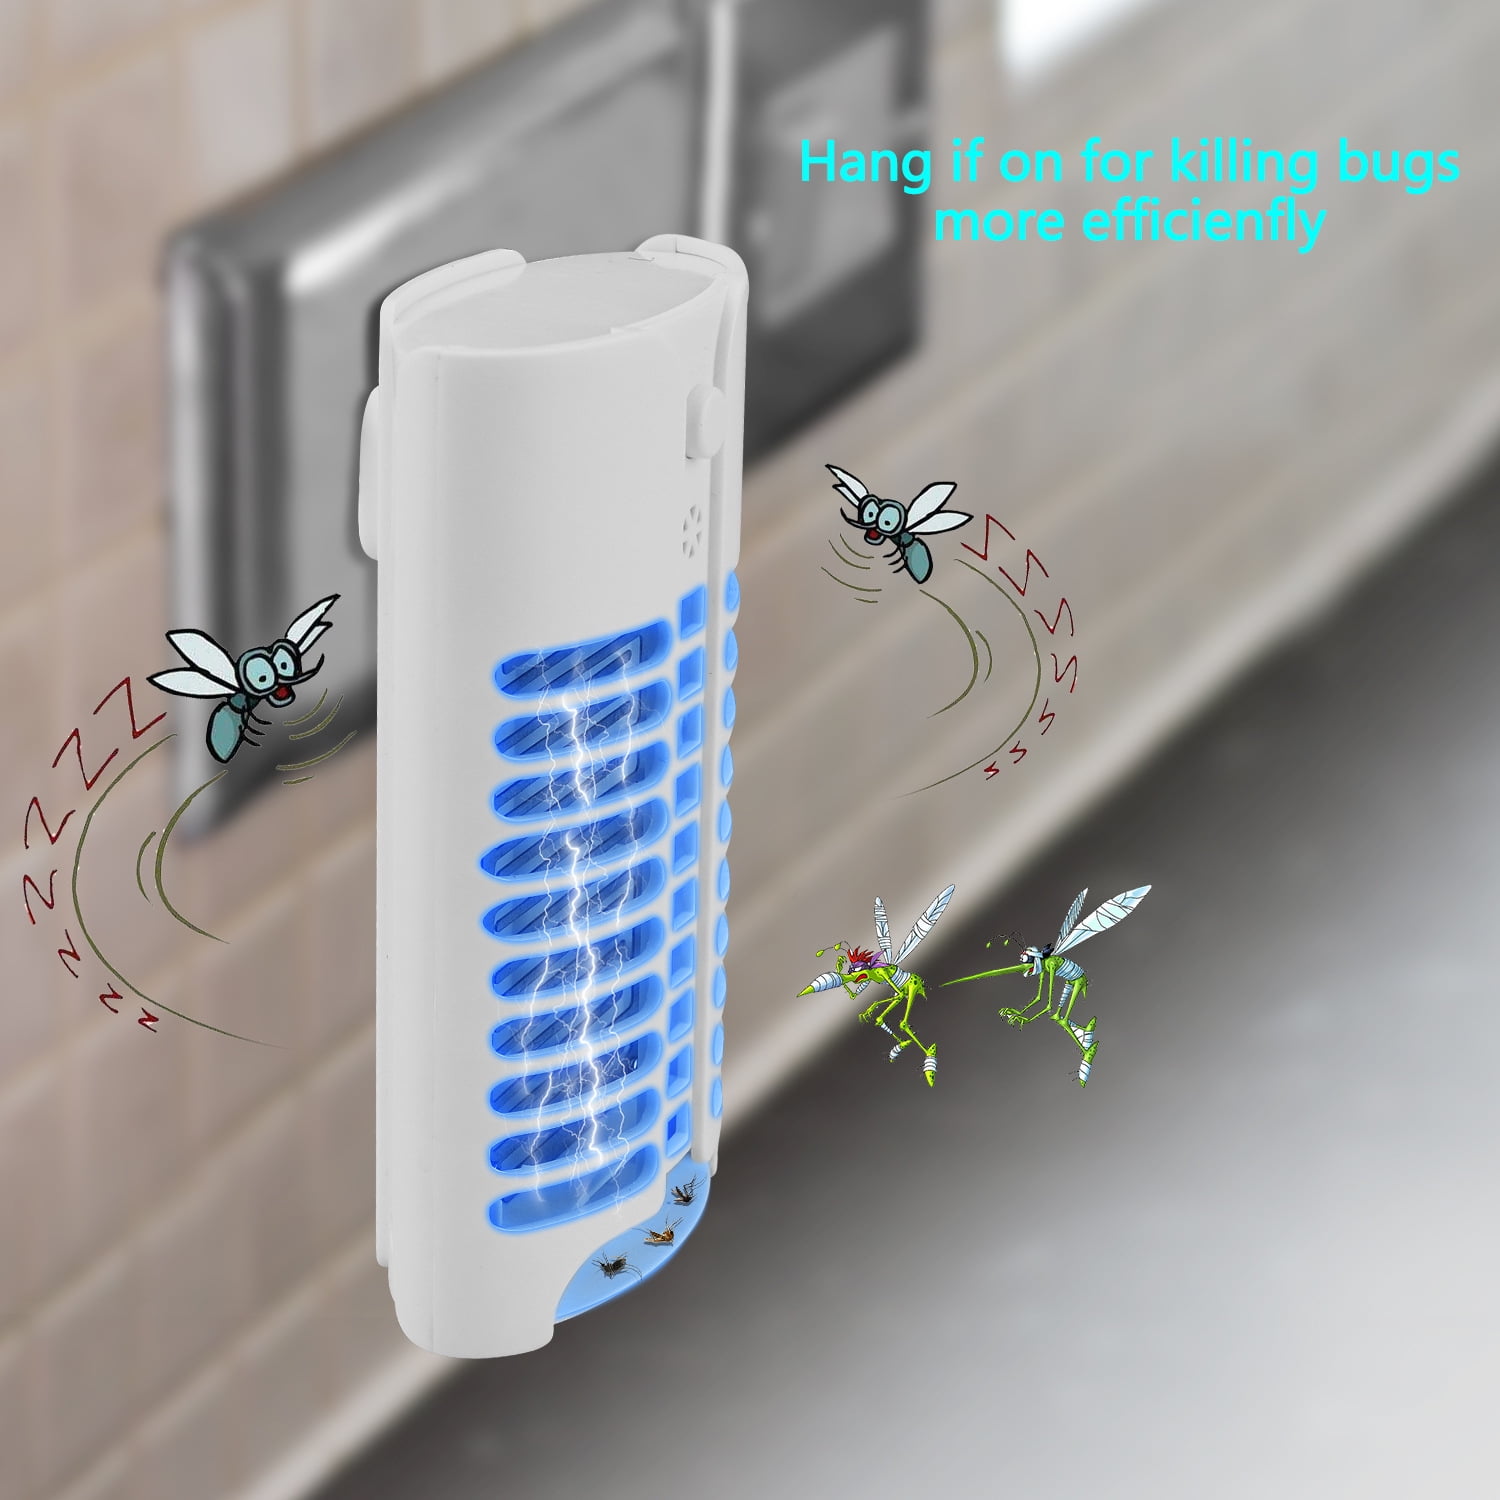 2x Flying Insect Killer Advanced Formula Kills Moths Mosquitos Flies 2in1 Trap 